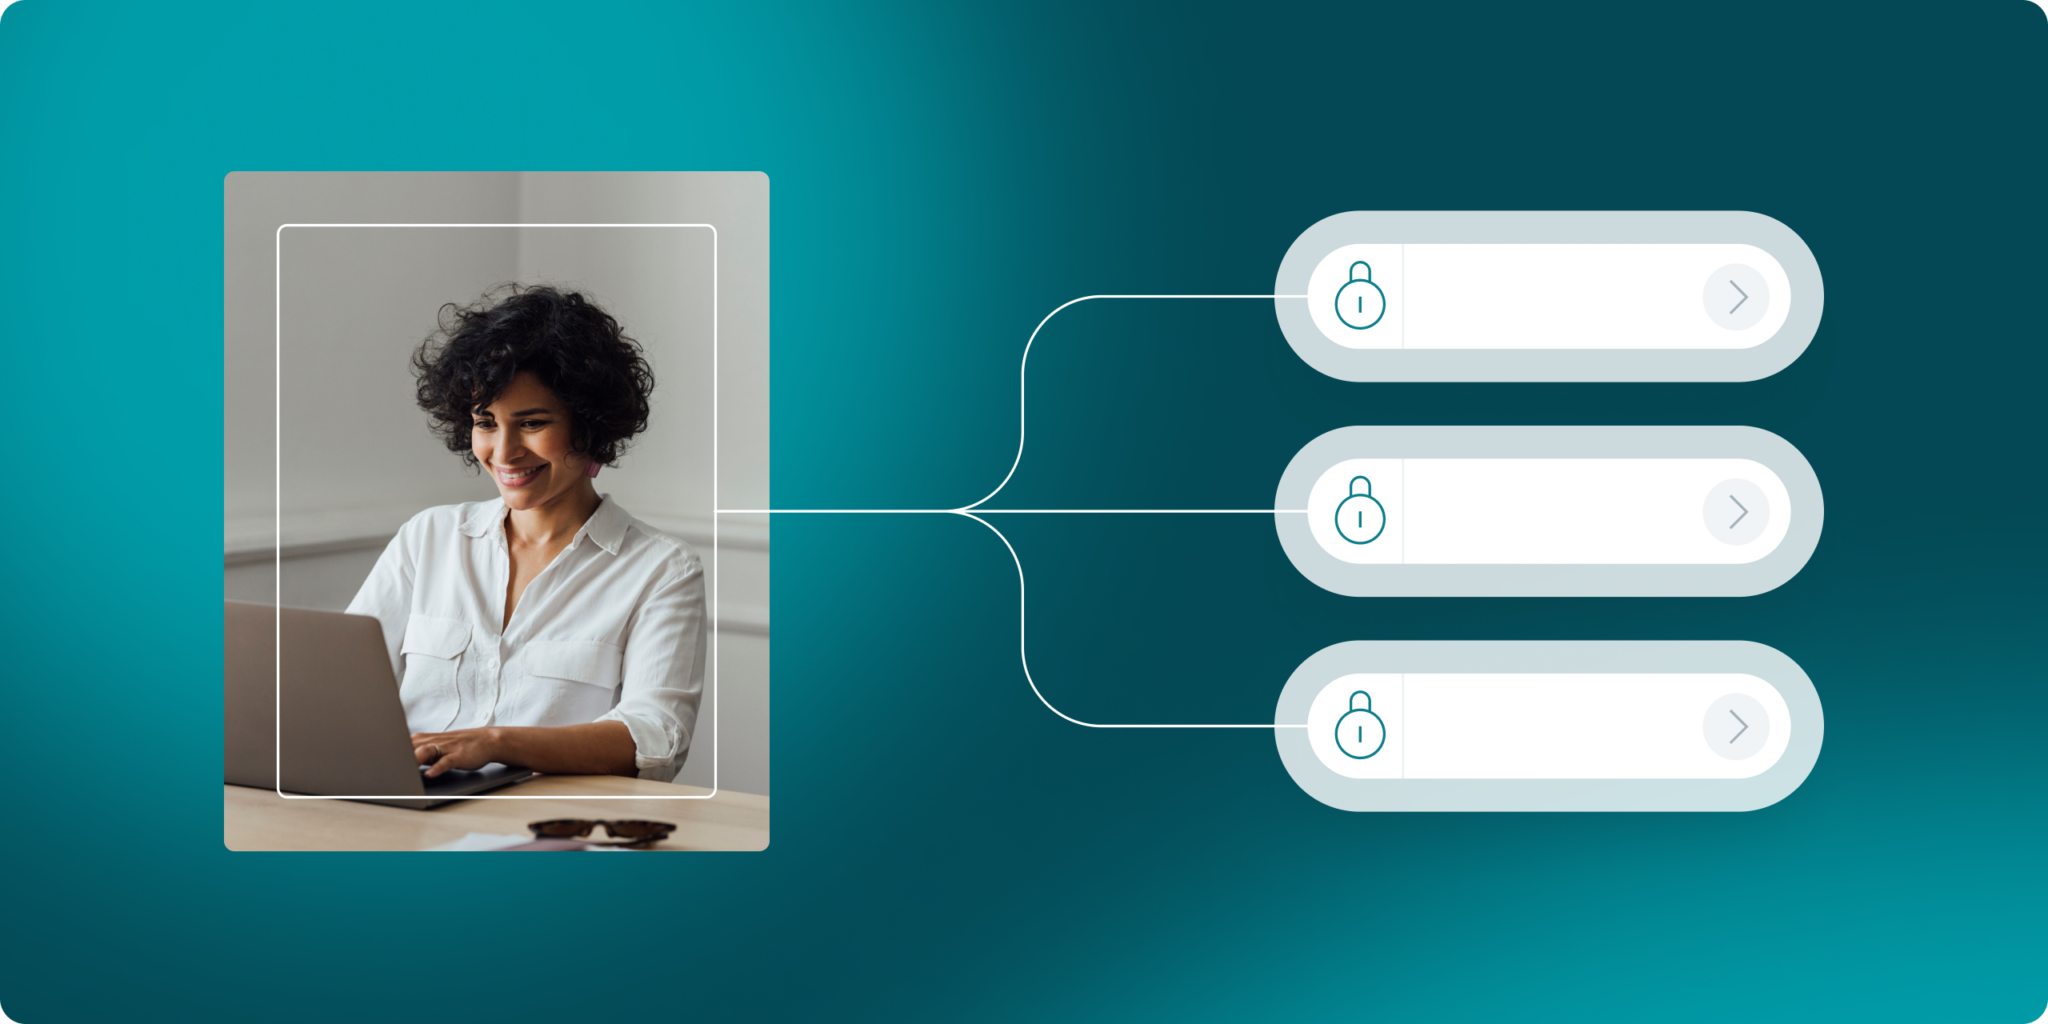 Graphic with a blue gradient background featuring an image of a woman on her laptop connected to three login fields, representing the secure enclaves that power Dashlane’s Confidential SSO & Provisioning integrations